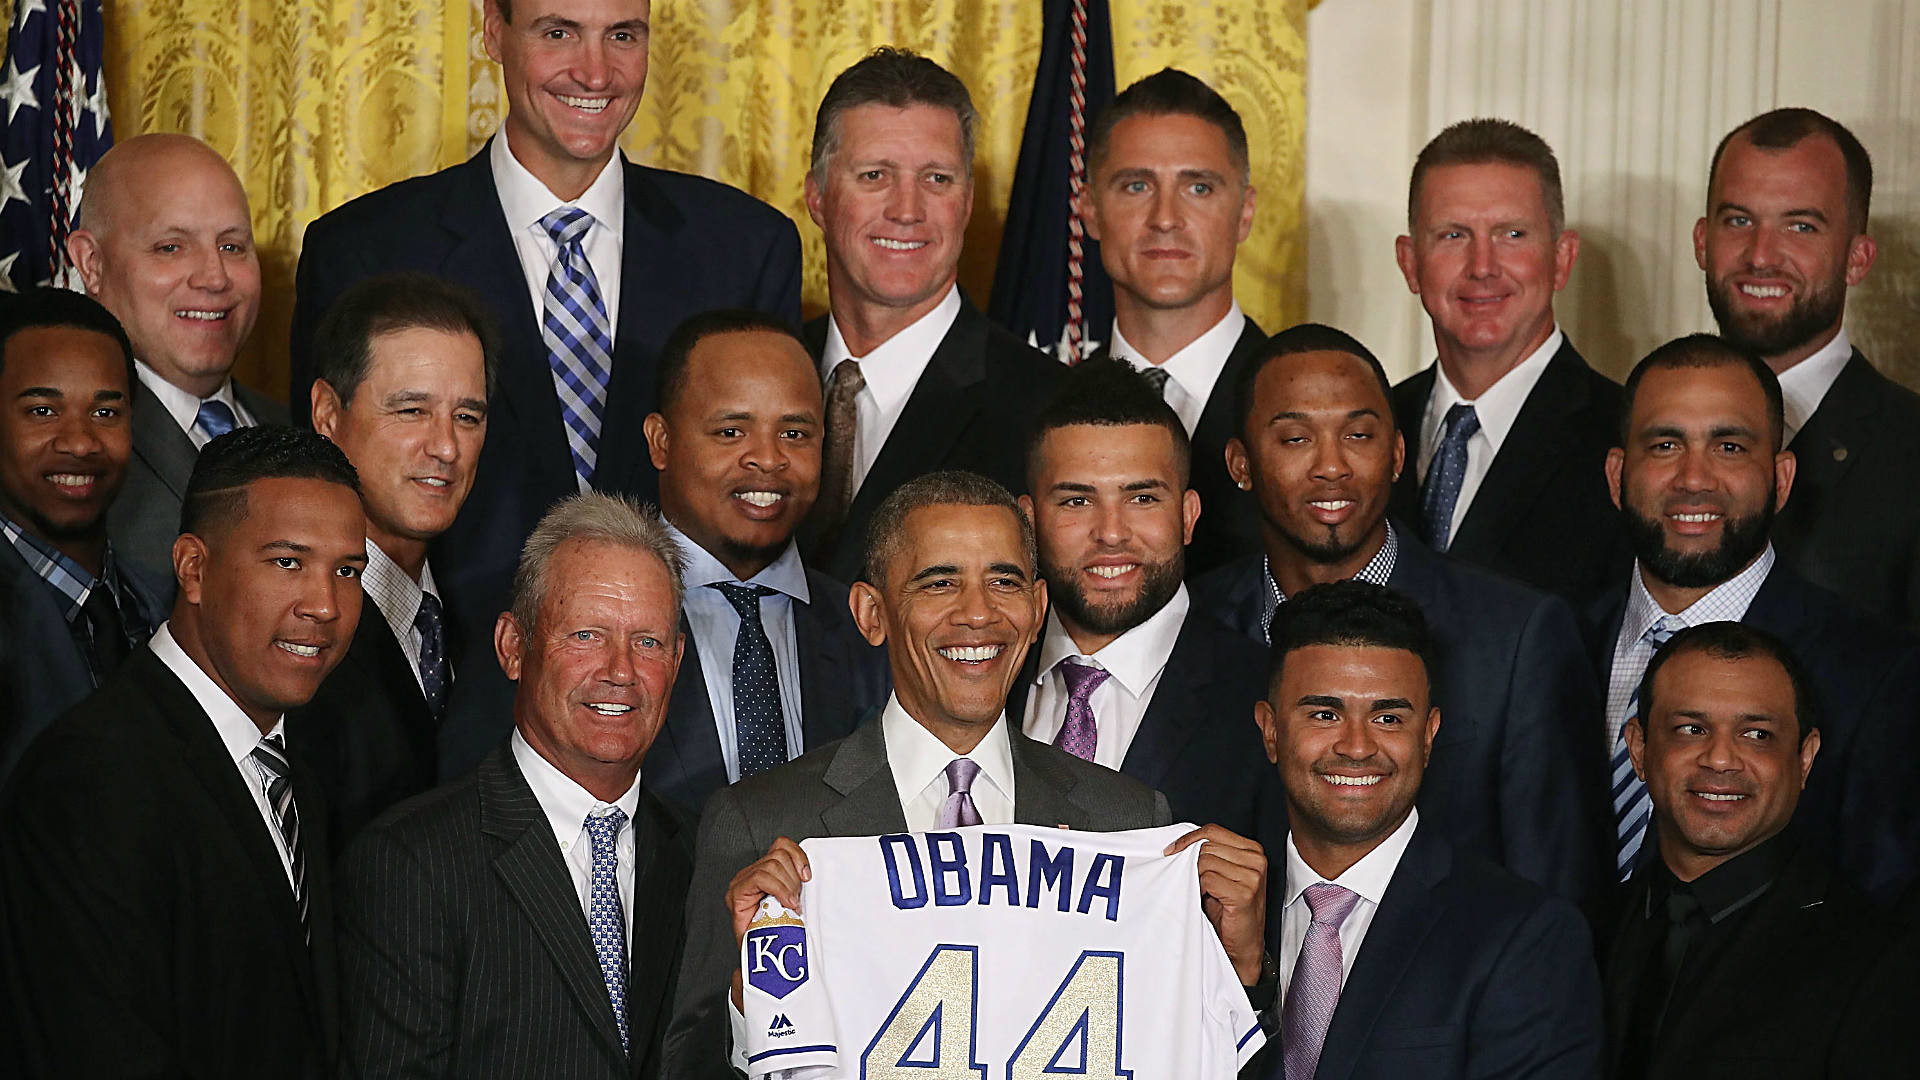 1920x1080 Obama honors Royals at White House, makes fun of players' nicknames